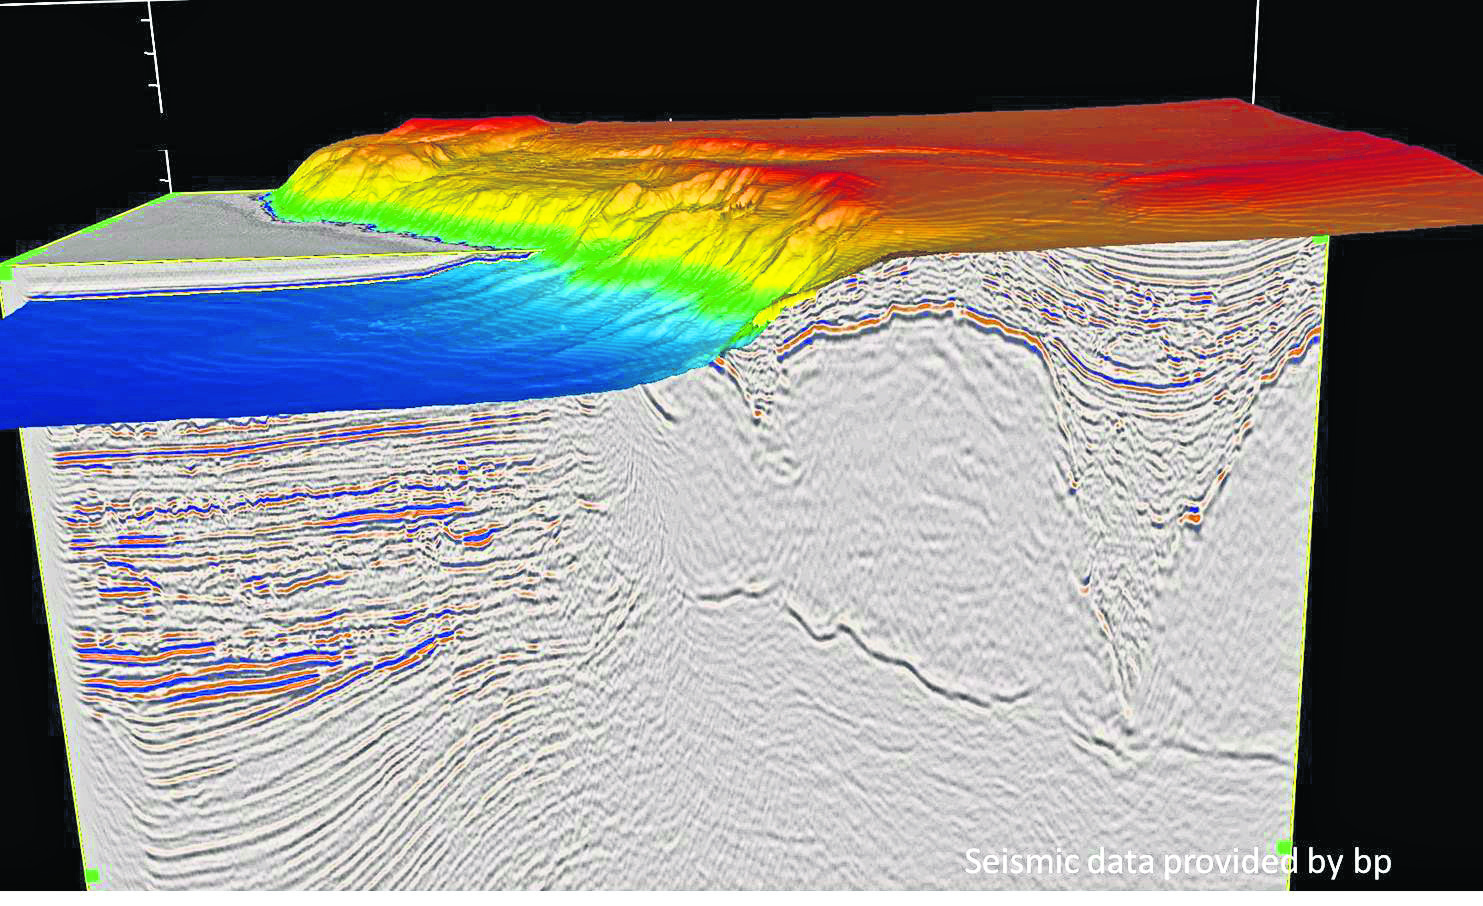 BREAKTHROUGH: Seismic 3D imaging is a classic example of an innovation that has helped the oil and gas industry to move forward